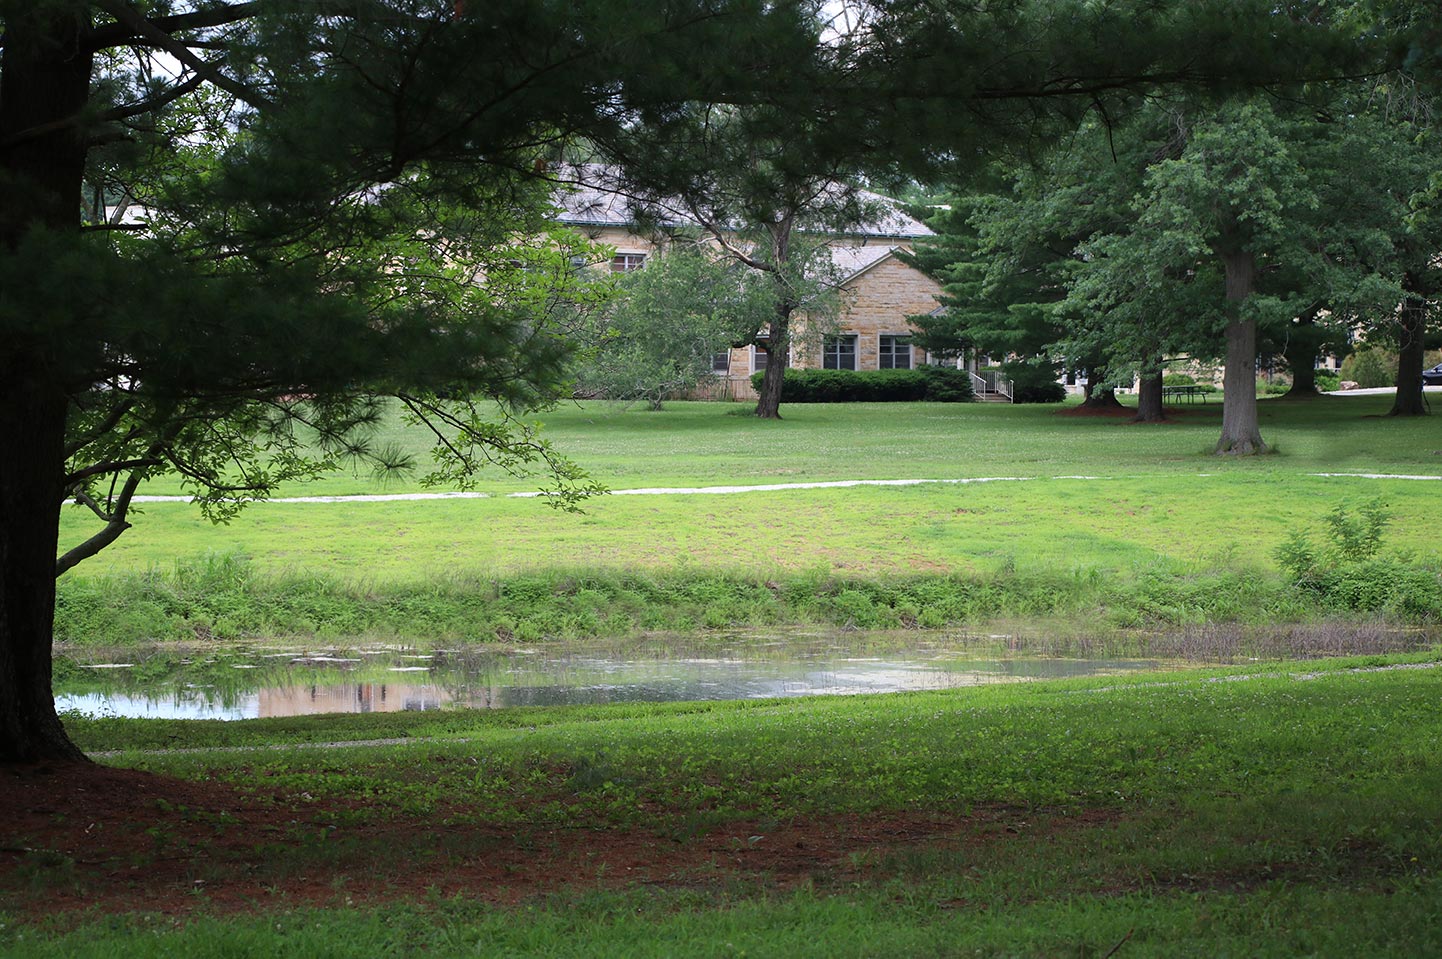 View of Goodwin Guest House from across Le Fer Lake